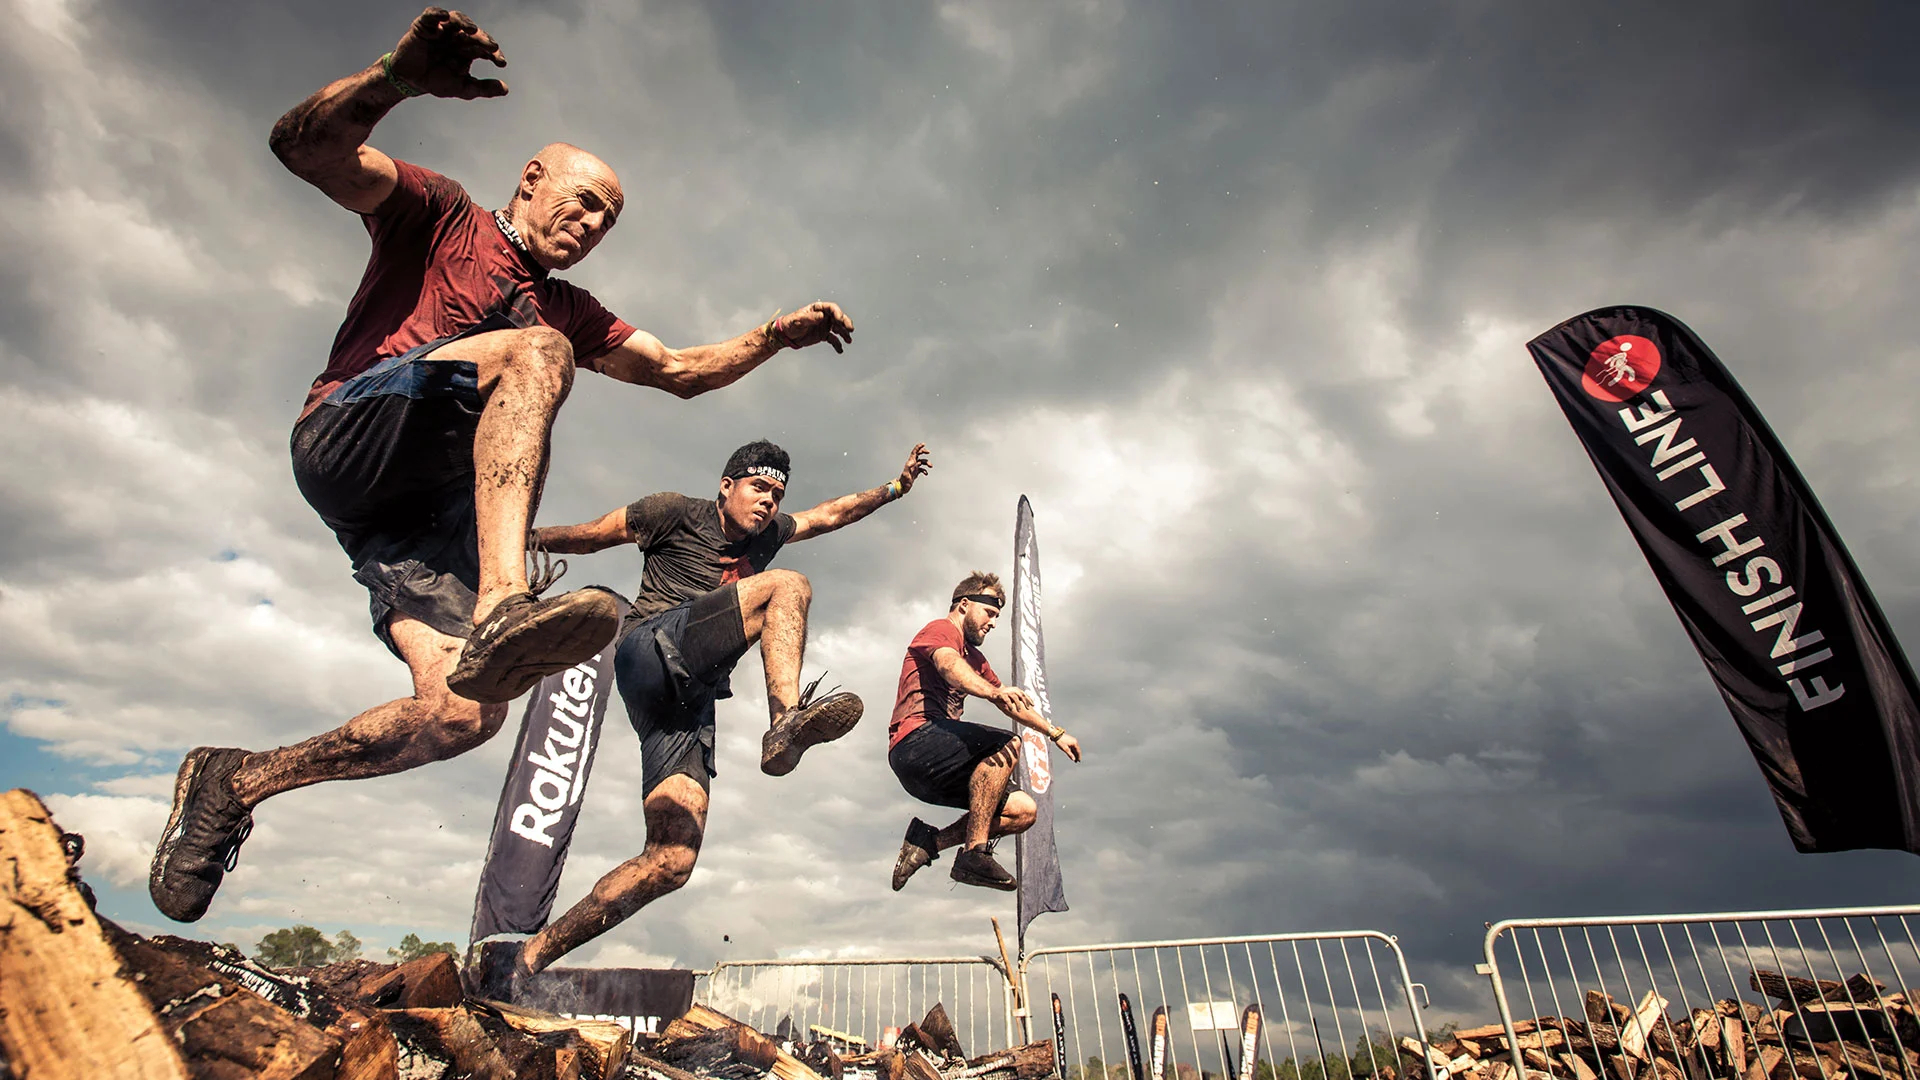 1920x1080 How Obstacle Course Racing Is Making a Comeback | Men's Journal